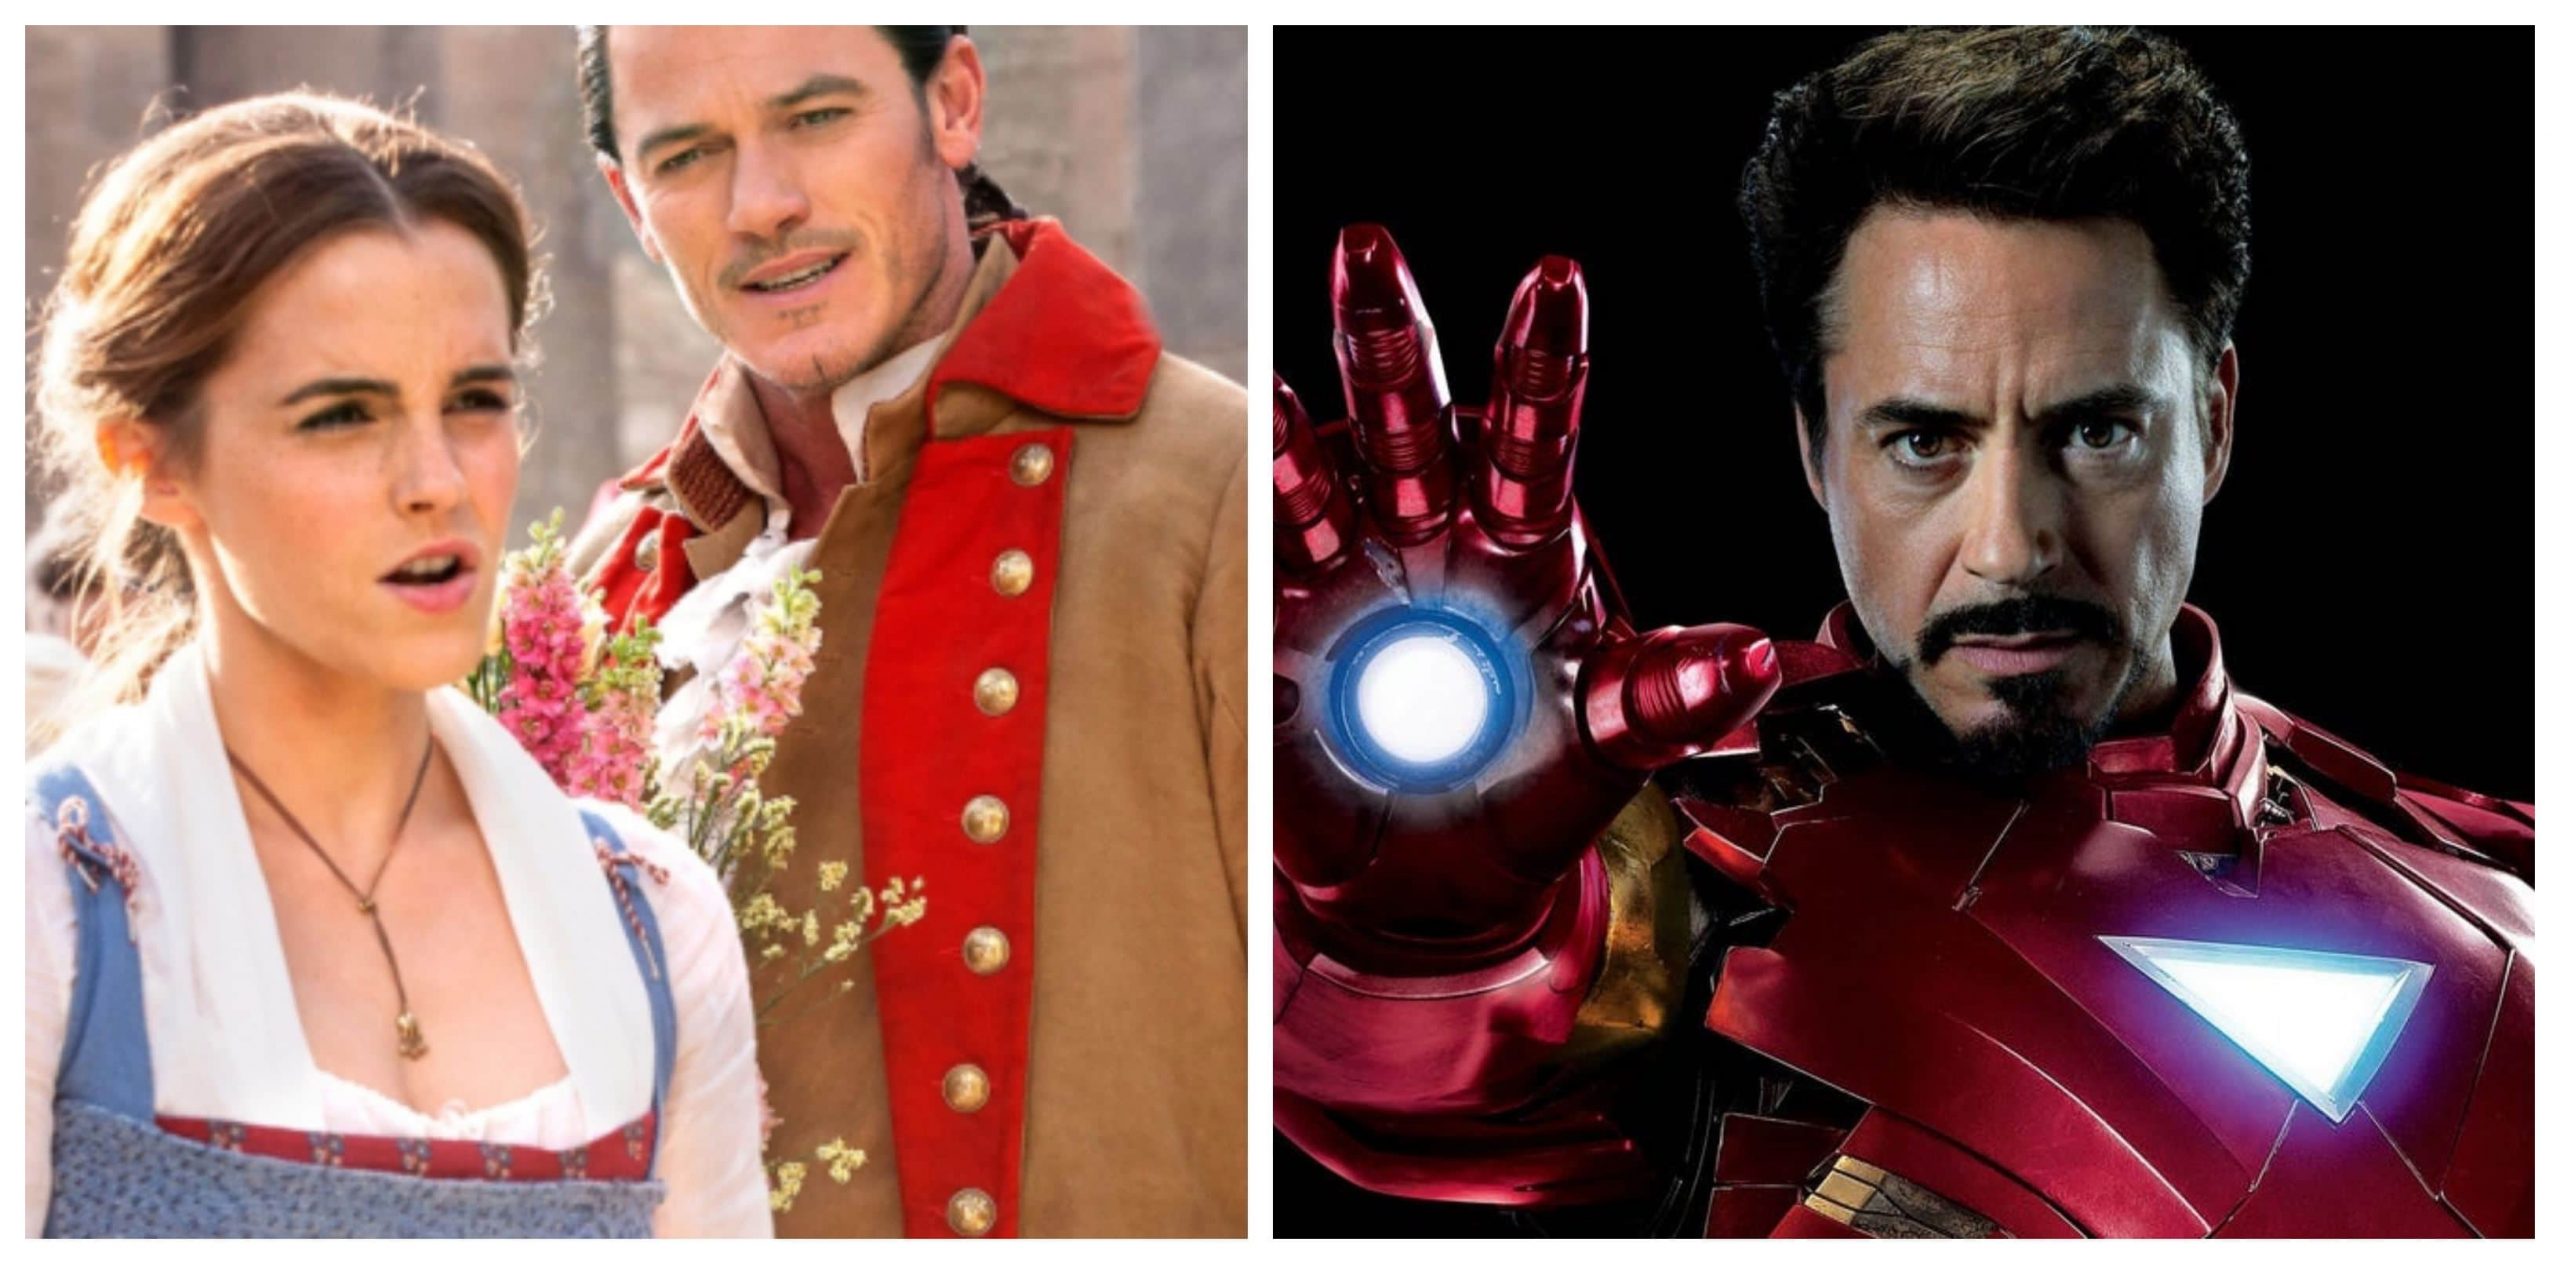 Beauty & the Beast & Iron Man top box office this past weekend!